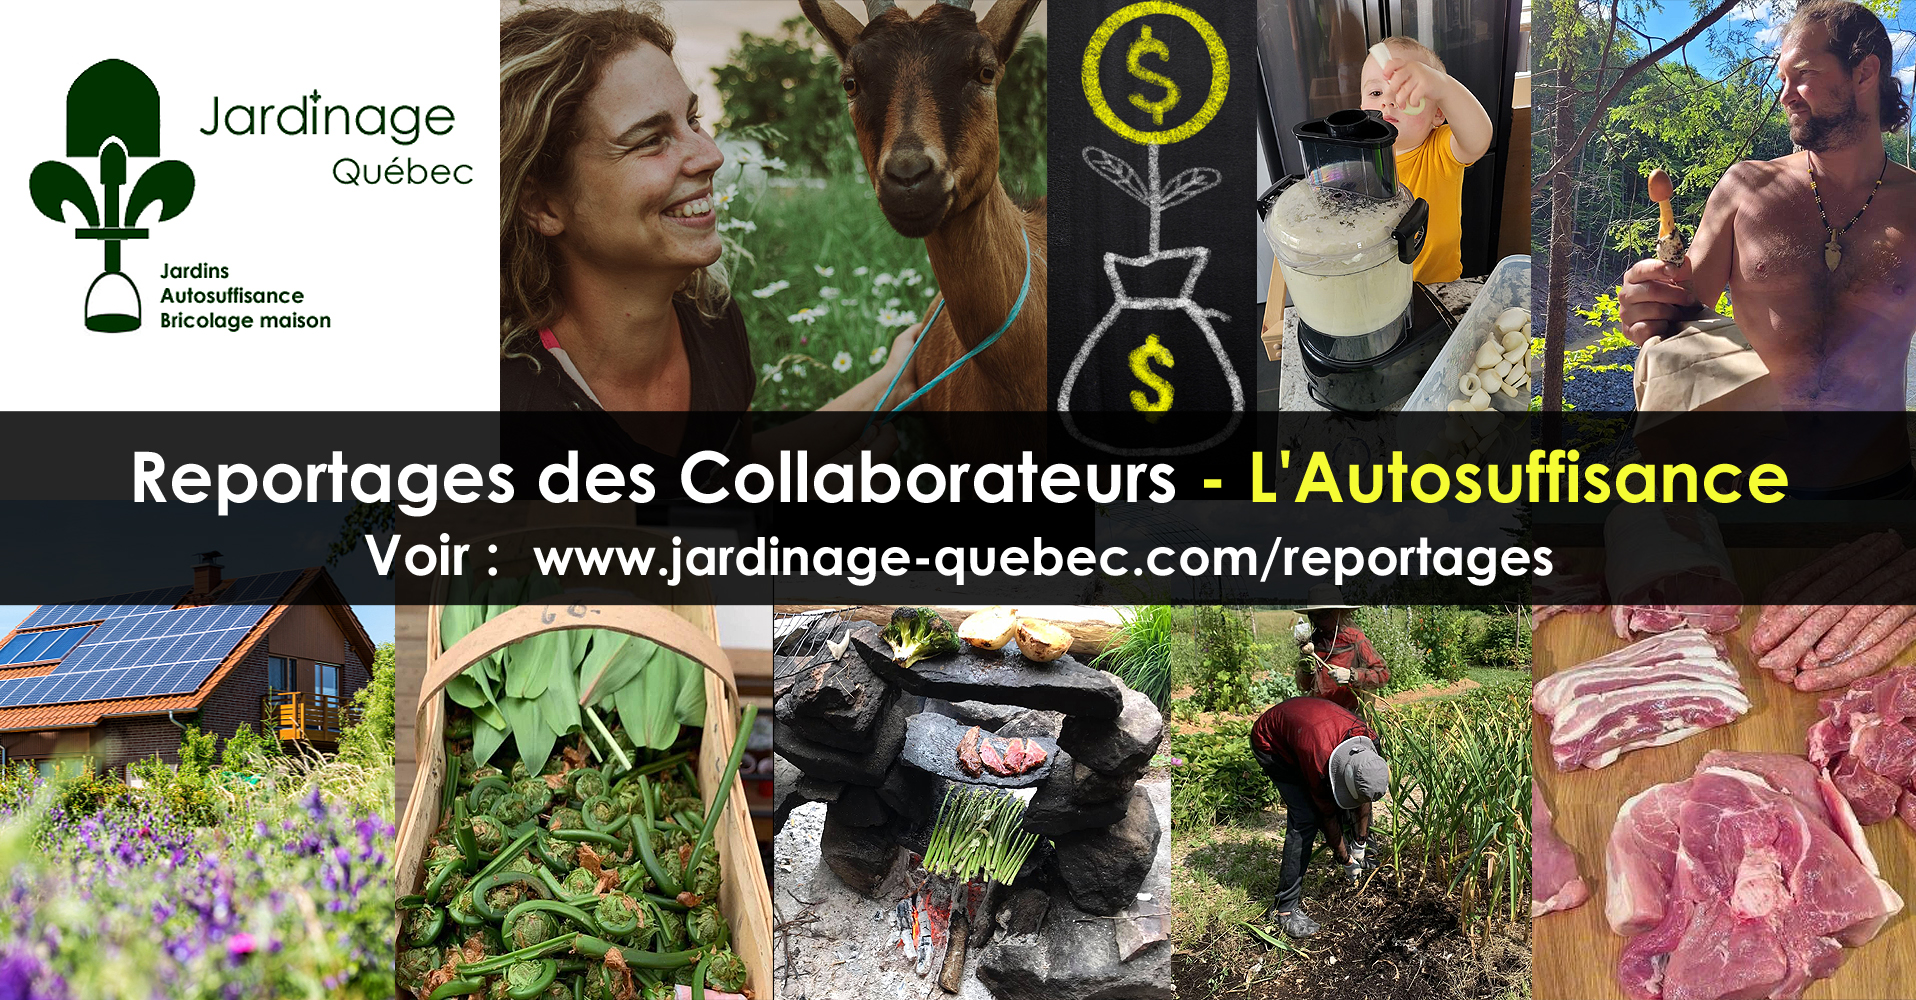 Ready go to ... https://www.jardinage-quebec.com/reportages/categories/autosuffisance/ [ L'Autosuffisance Reportages et Articles - Jardinage Bricolage Autosuffisance Recyclage Québec]